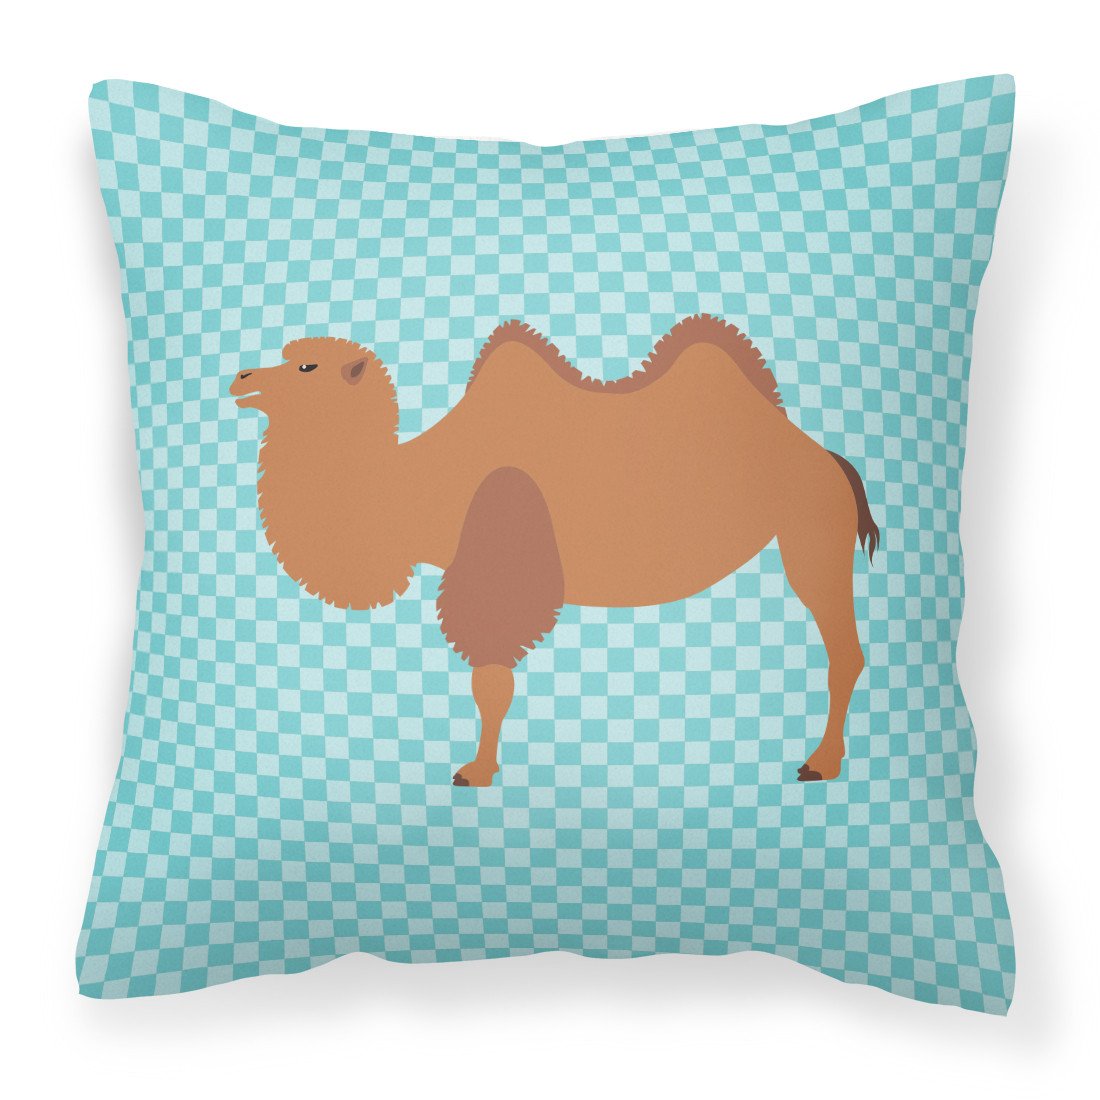 Bactrian Camel Blue Check Fabric Decorative Pillow BB7992PW1818 by Caroline's Treasures